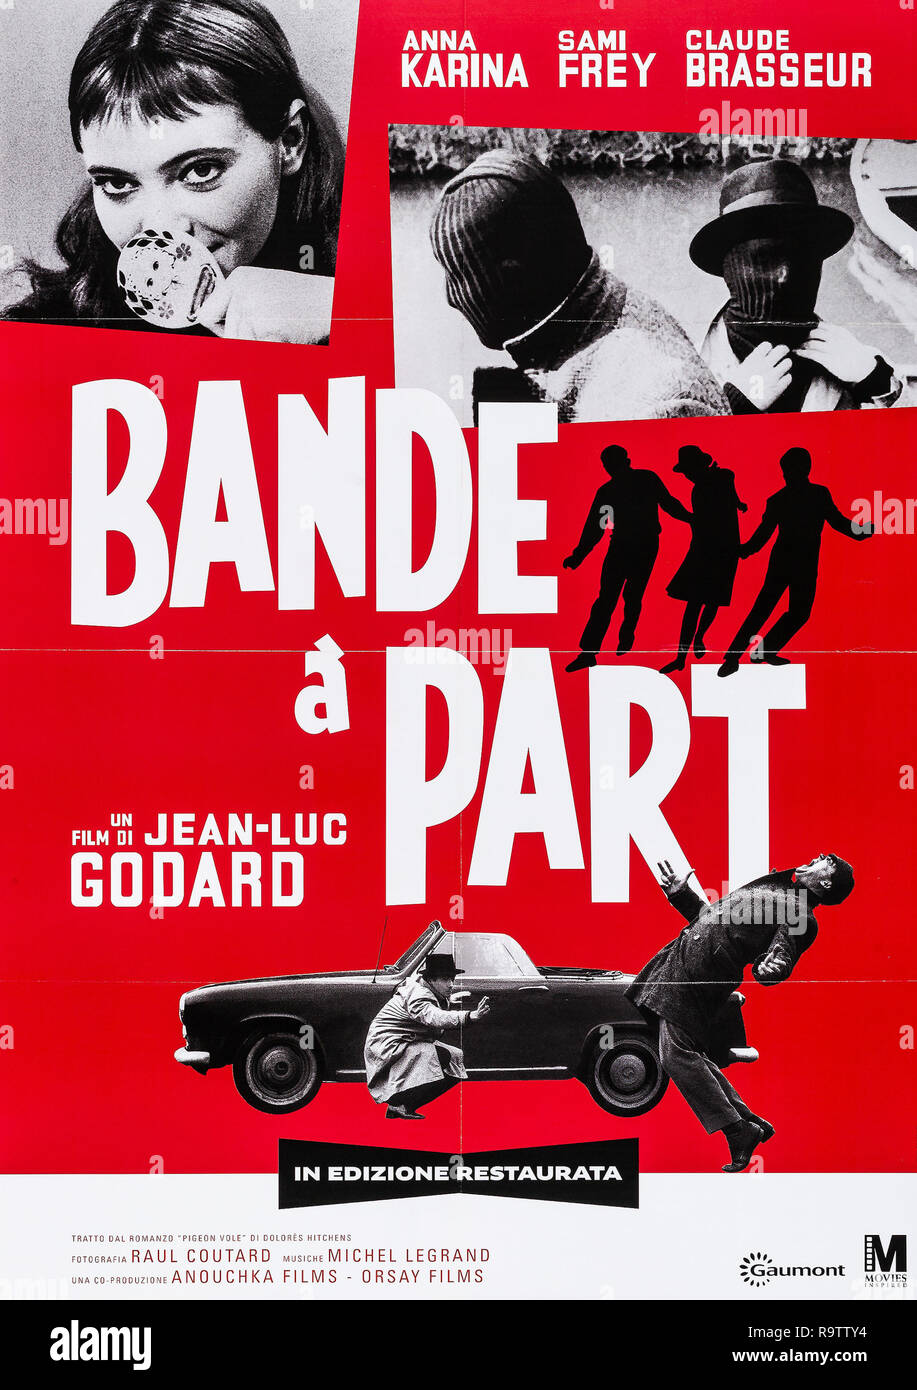 Bande a Part (1964) (Gaumont, Re-issue 2001) Poster  Anna Karina, Sami Frey File Reference # 33635 887THA Stock Photo